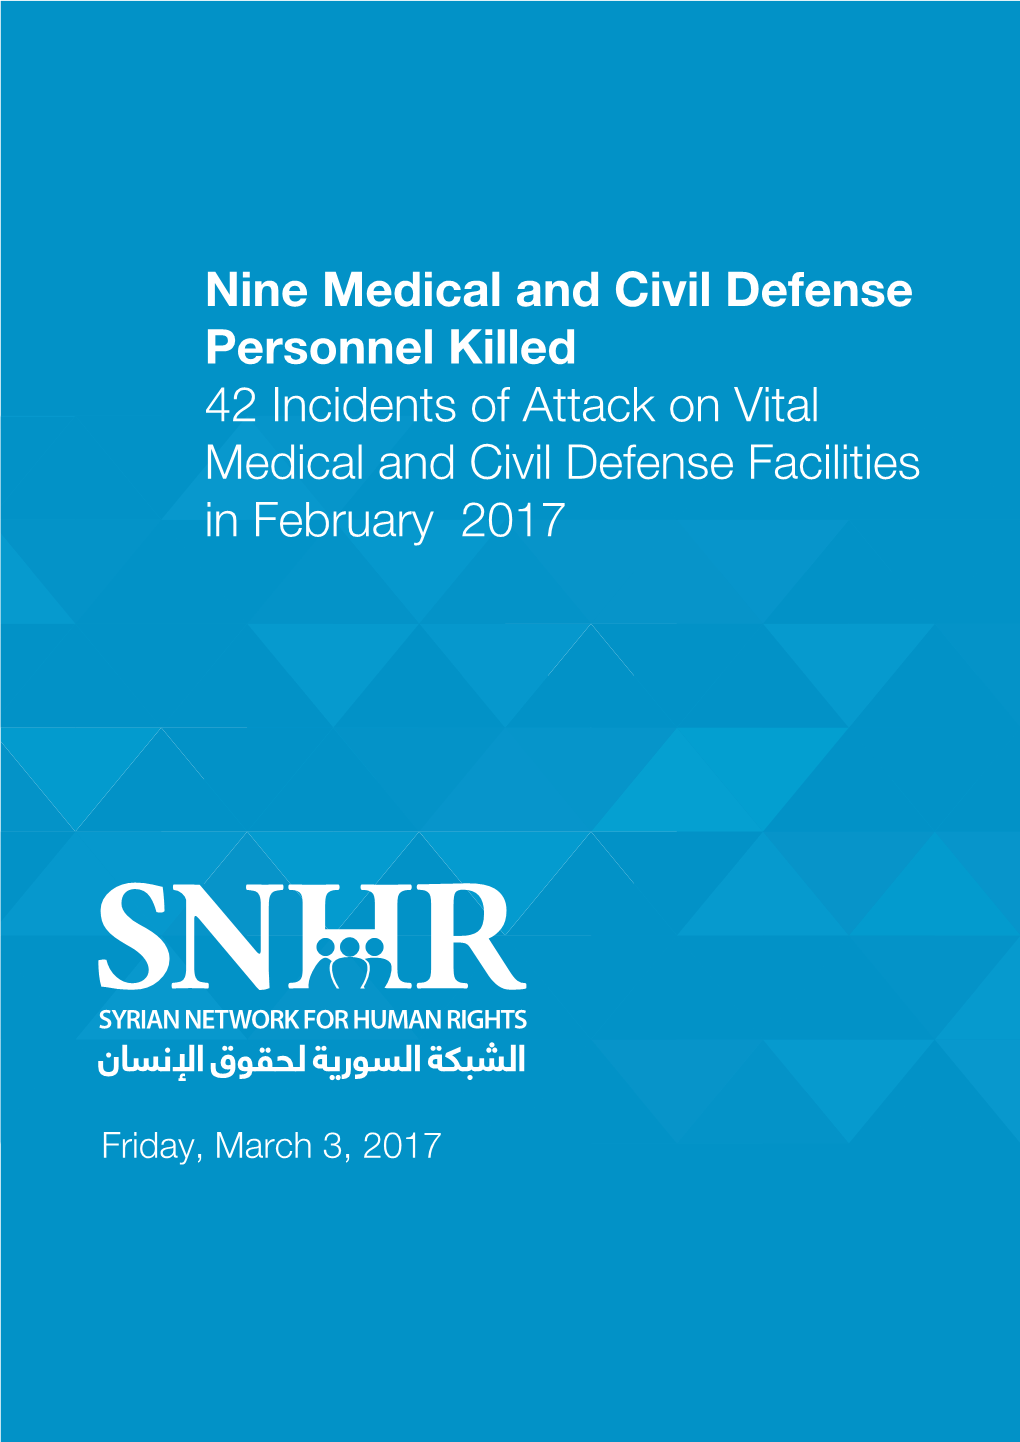 Nine Medical and Civil Defense Personnel Killed 42 Incidents of Attack on Vital Medical and Civil Defense Facilities in February 2017